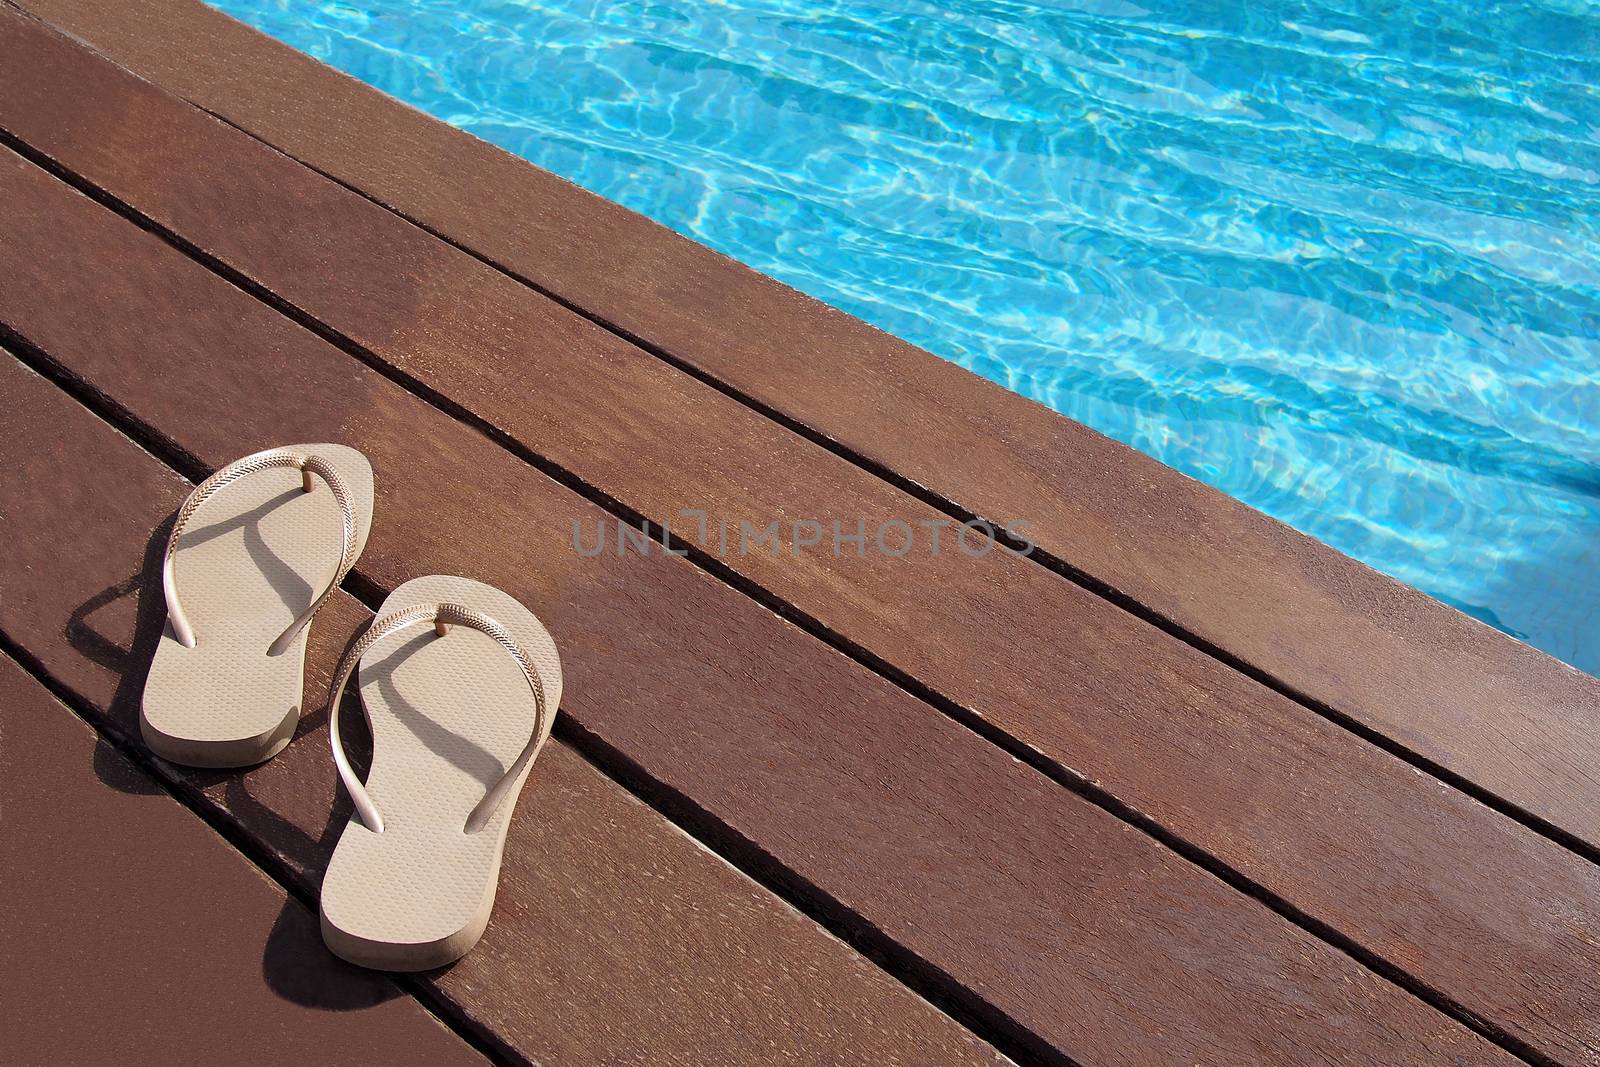 Flip flops by the swimming pool by stockyimages